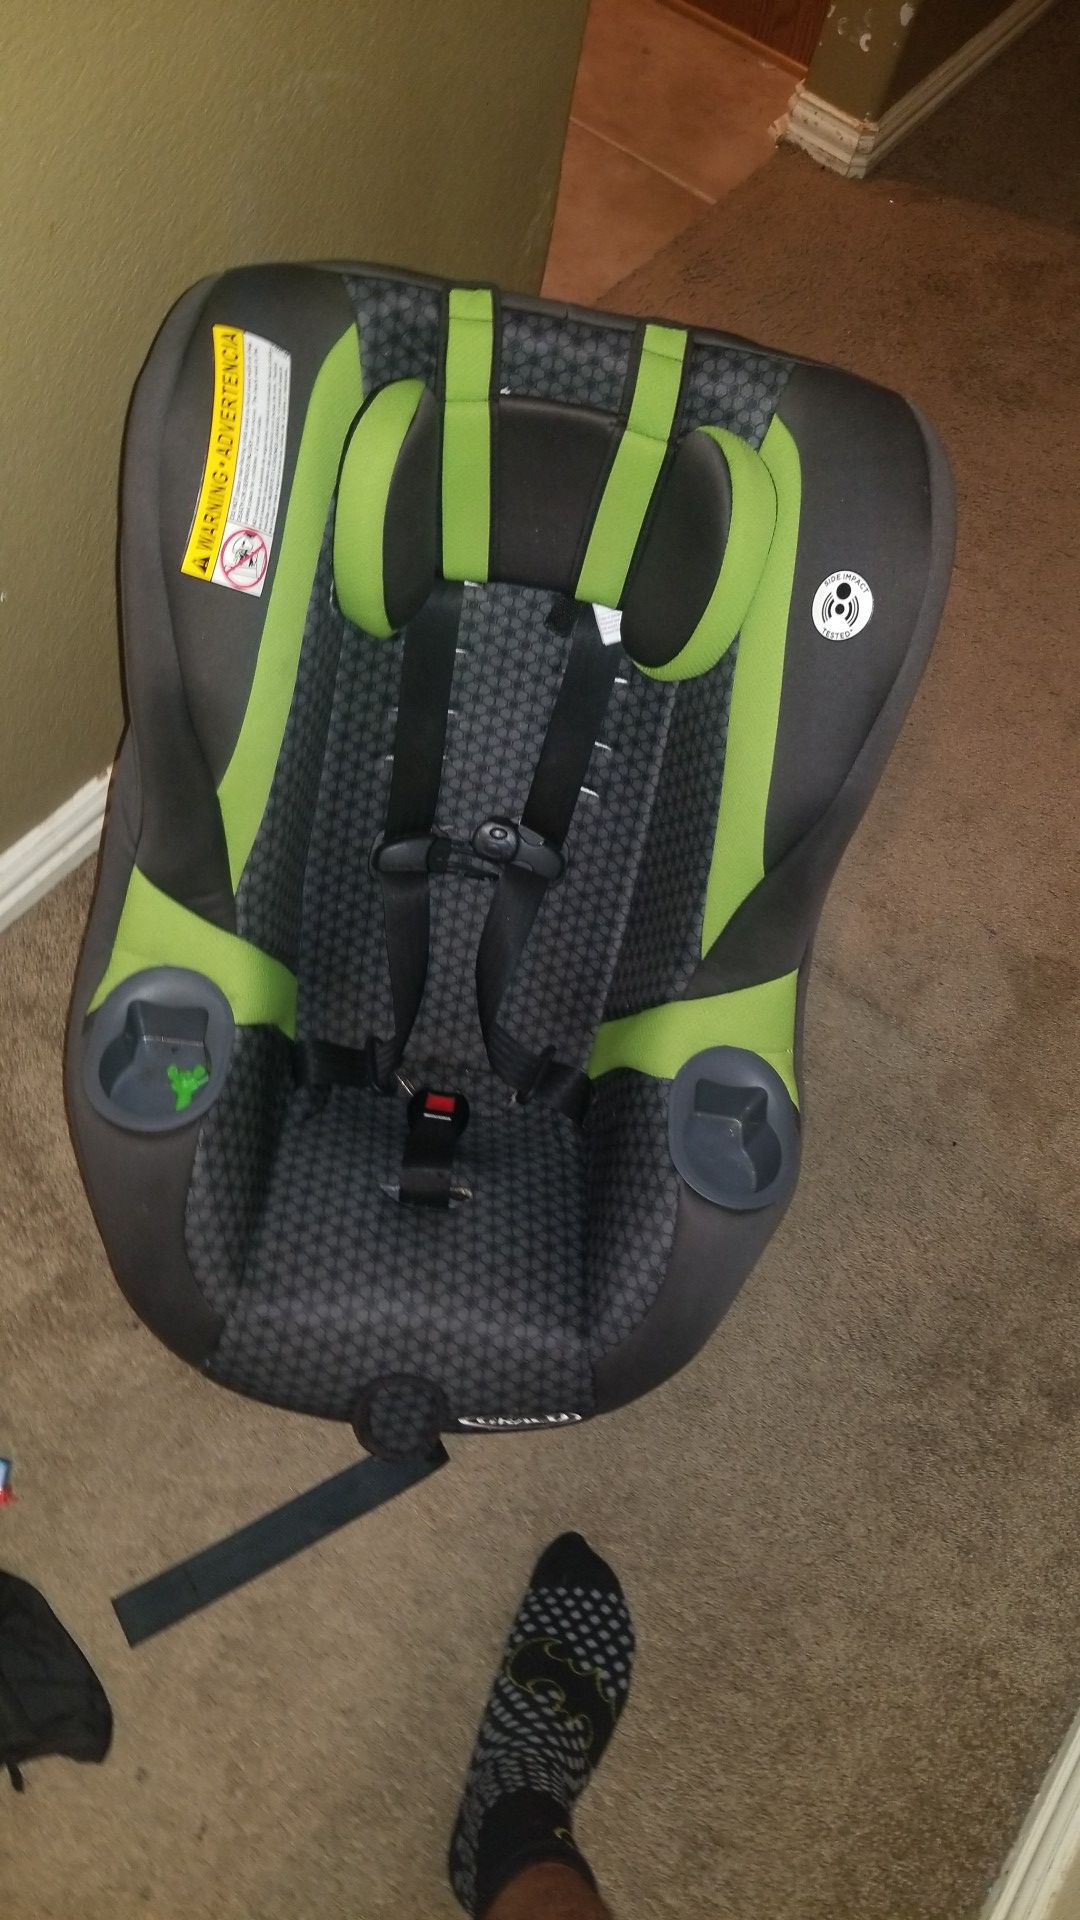 Graco My Ride 65 car seat with matching Eddie Bauer diaper bag